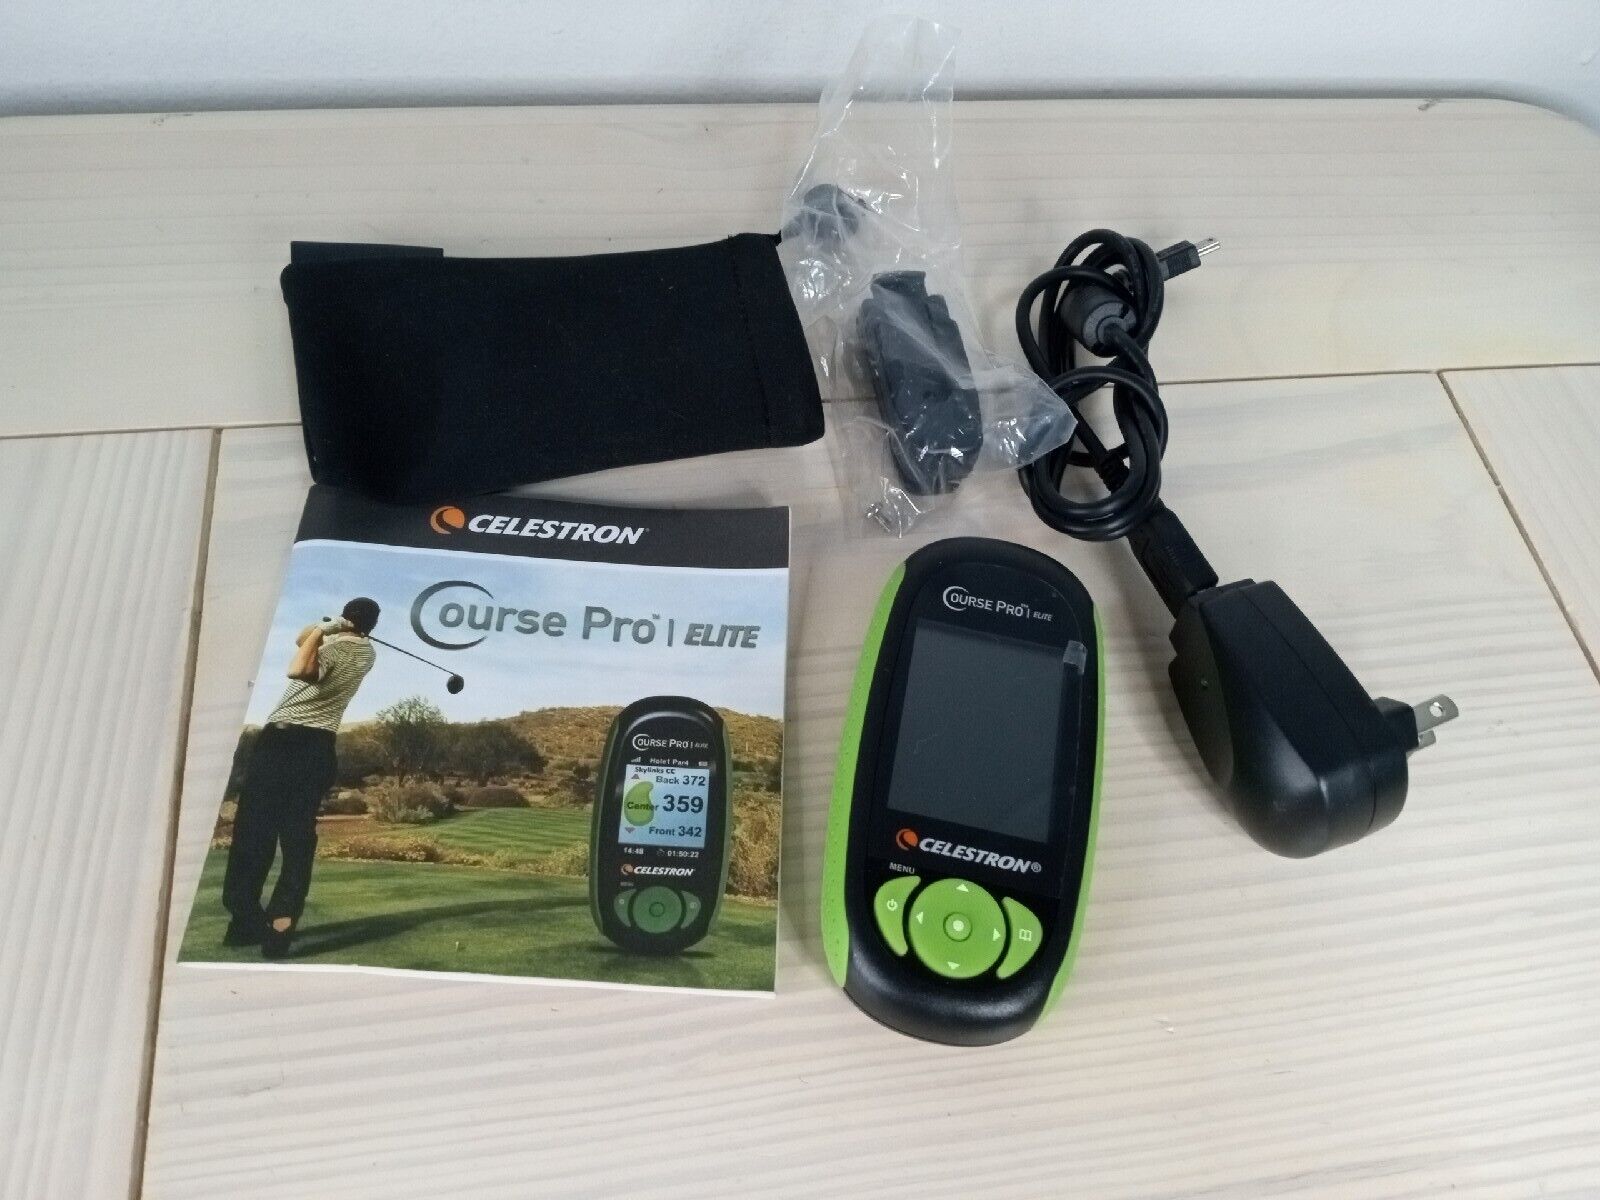 Celestron course pro elite  with charger,clip,instructions and box.